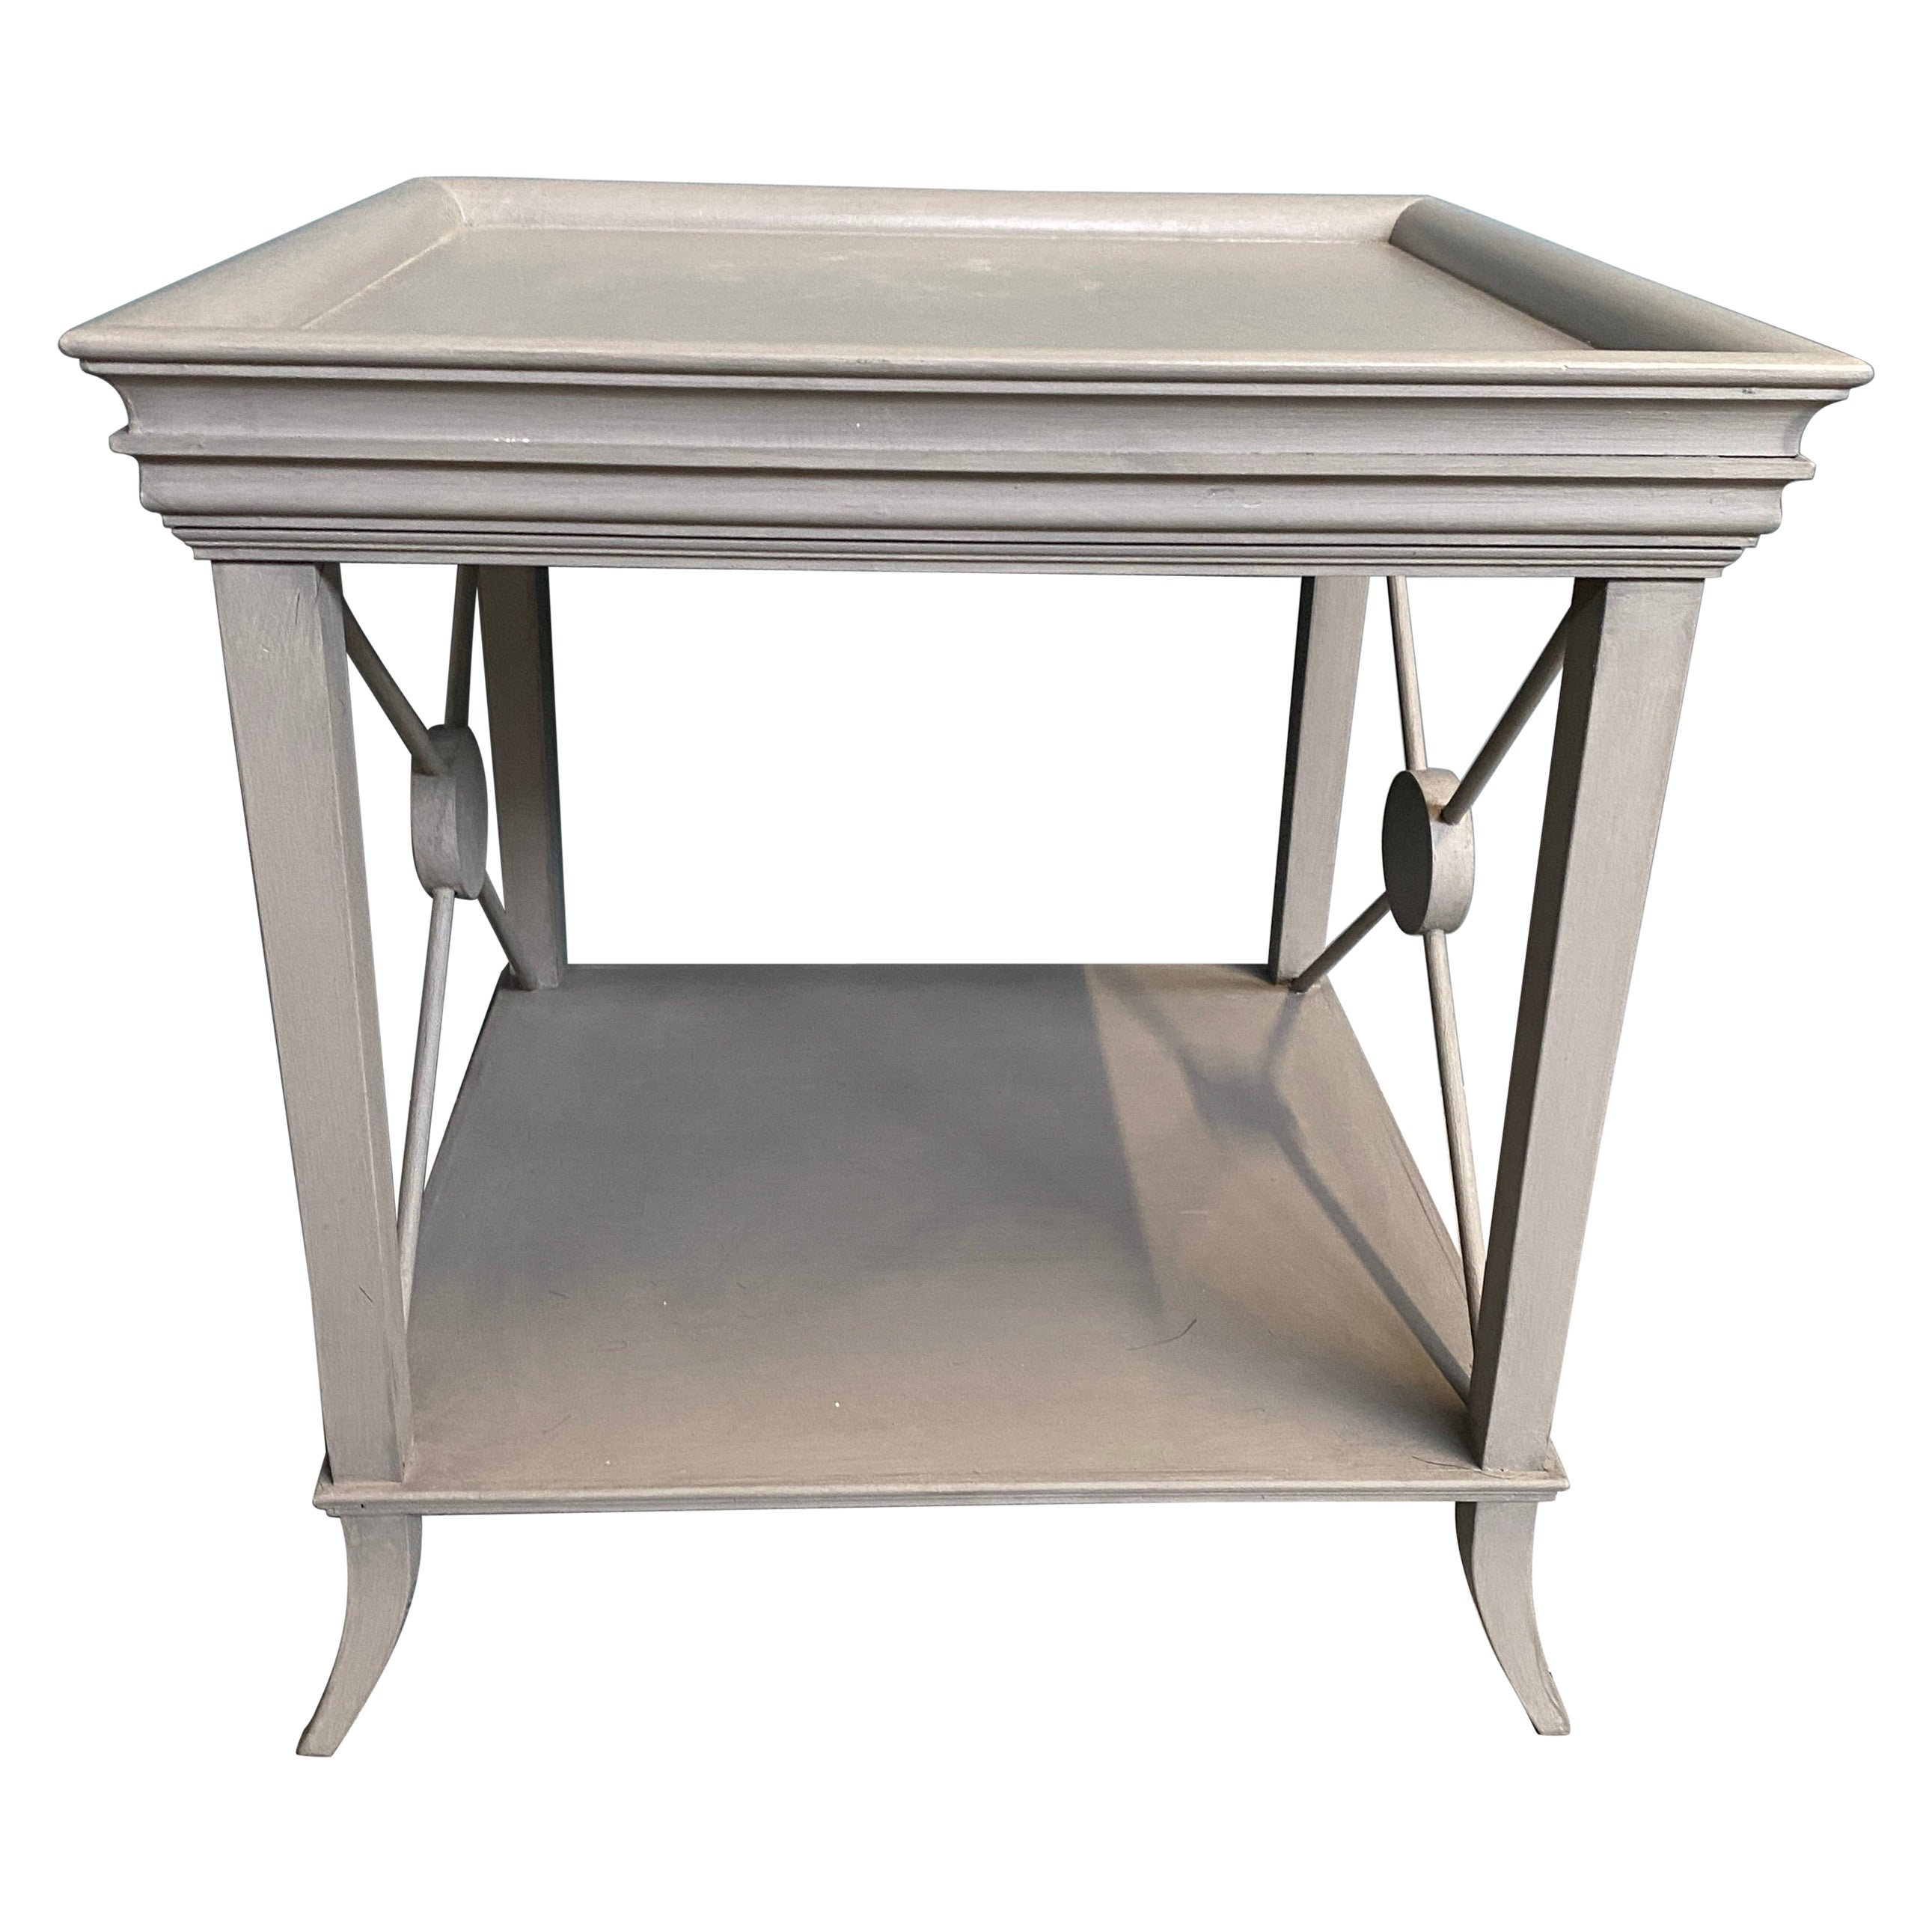 Italian Contemporary  Grey Lacquered Wood Side Table with Wood Finishes